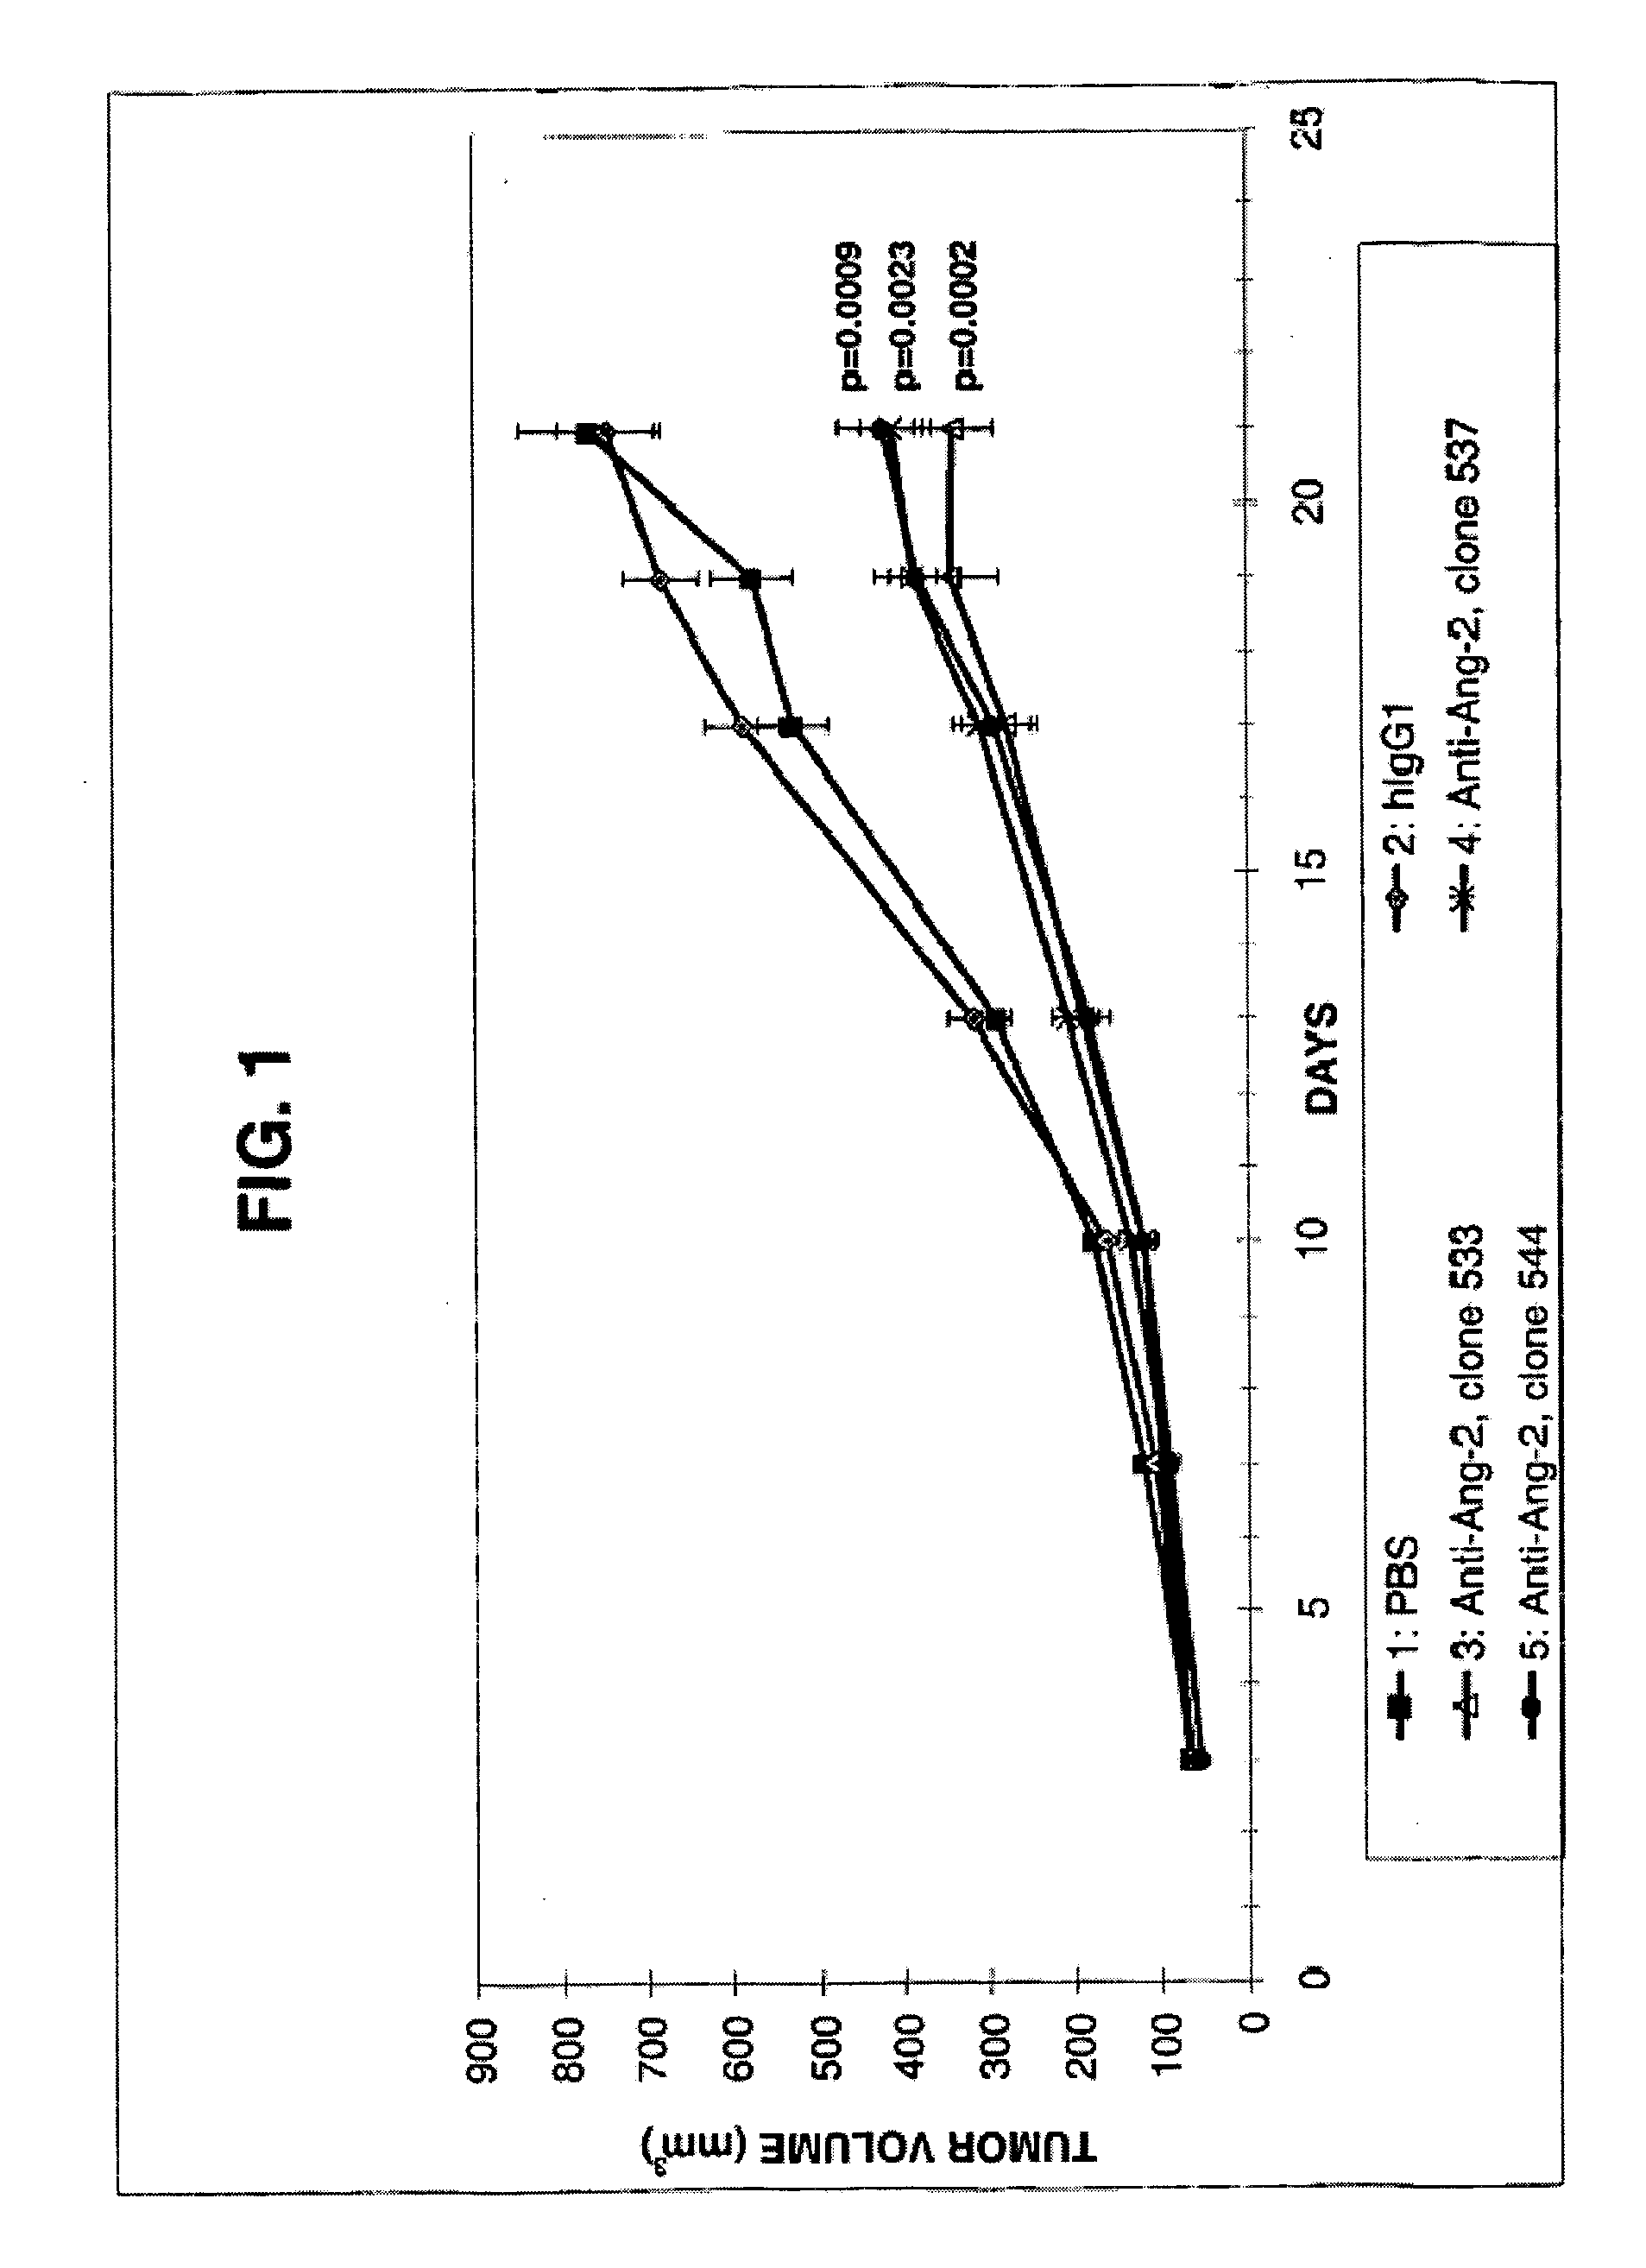 Angiopoietin-2 specific binding agents